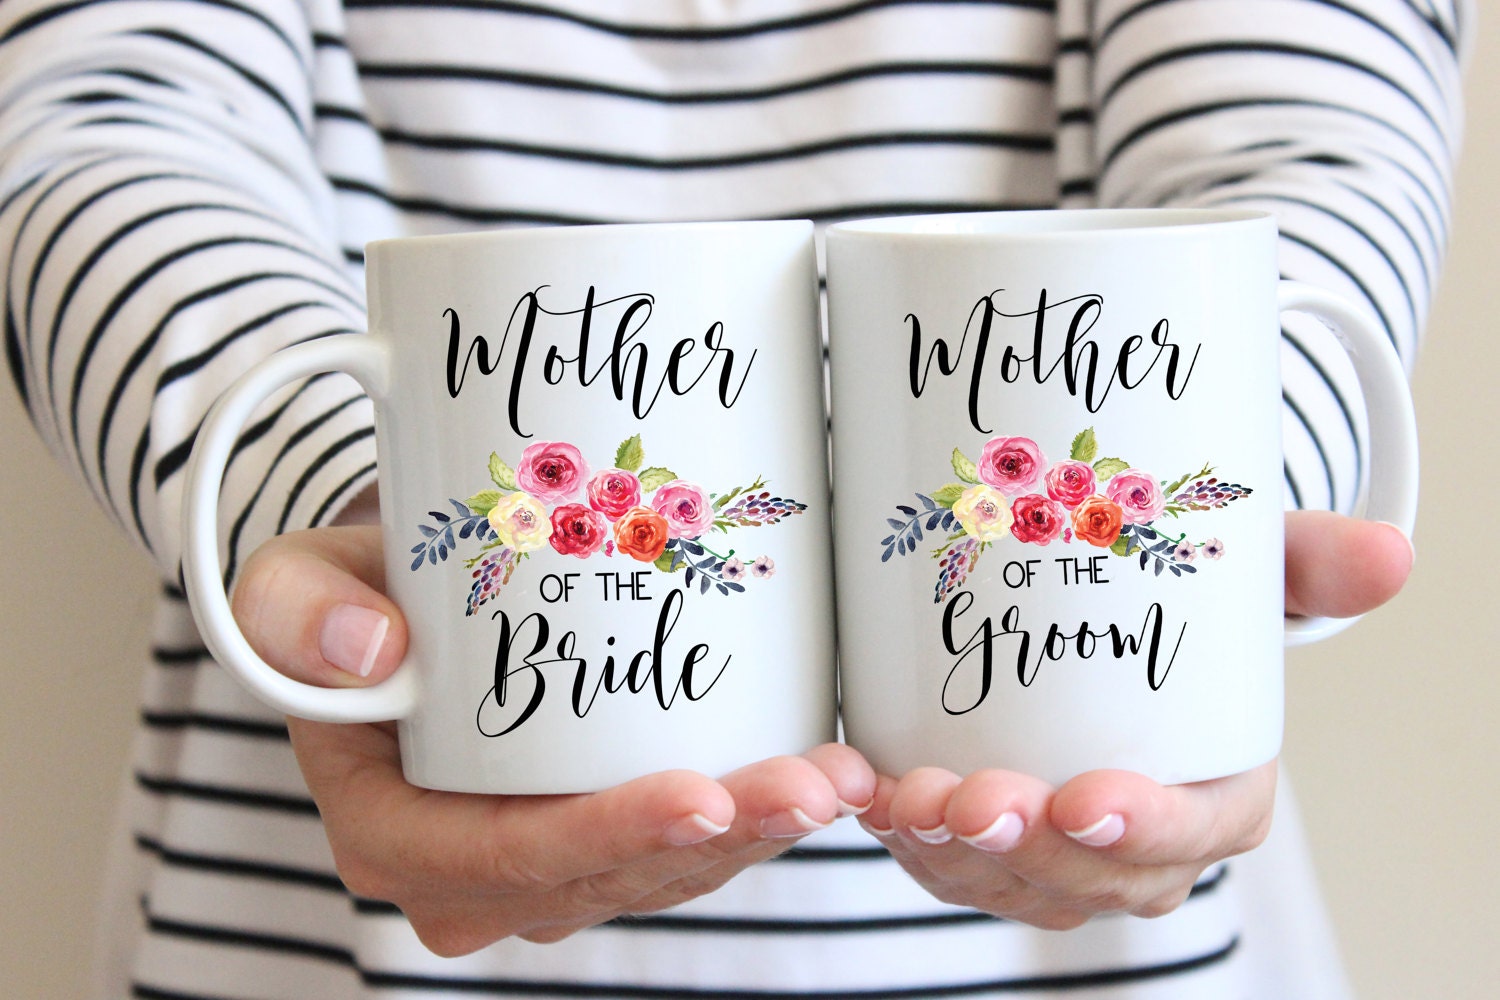 Mother of the Bride Gift Mother of the Groom Gift Mugs for Wedding Gift Set Engagement Announcement Gift for Parents Mug for Mom two mug set